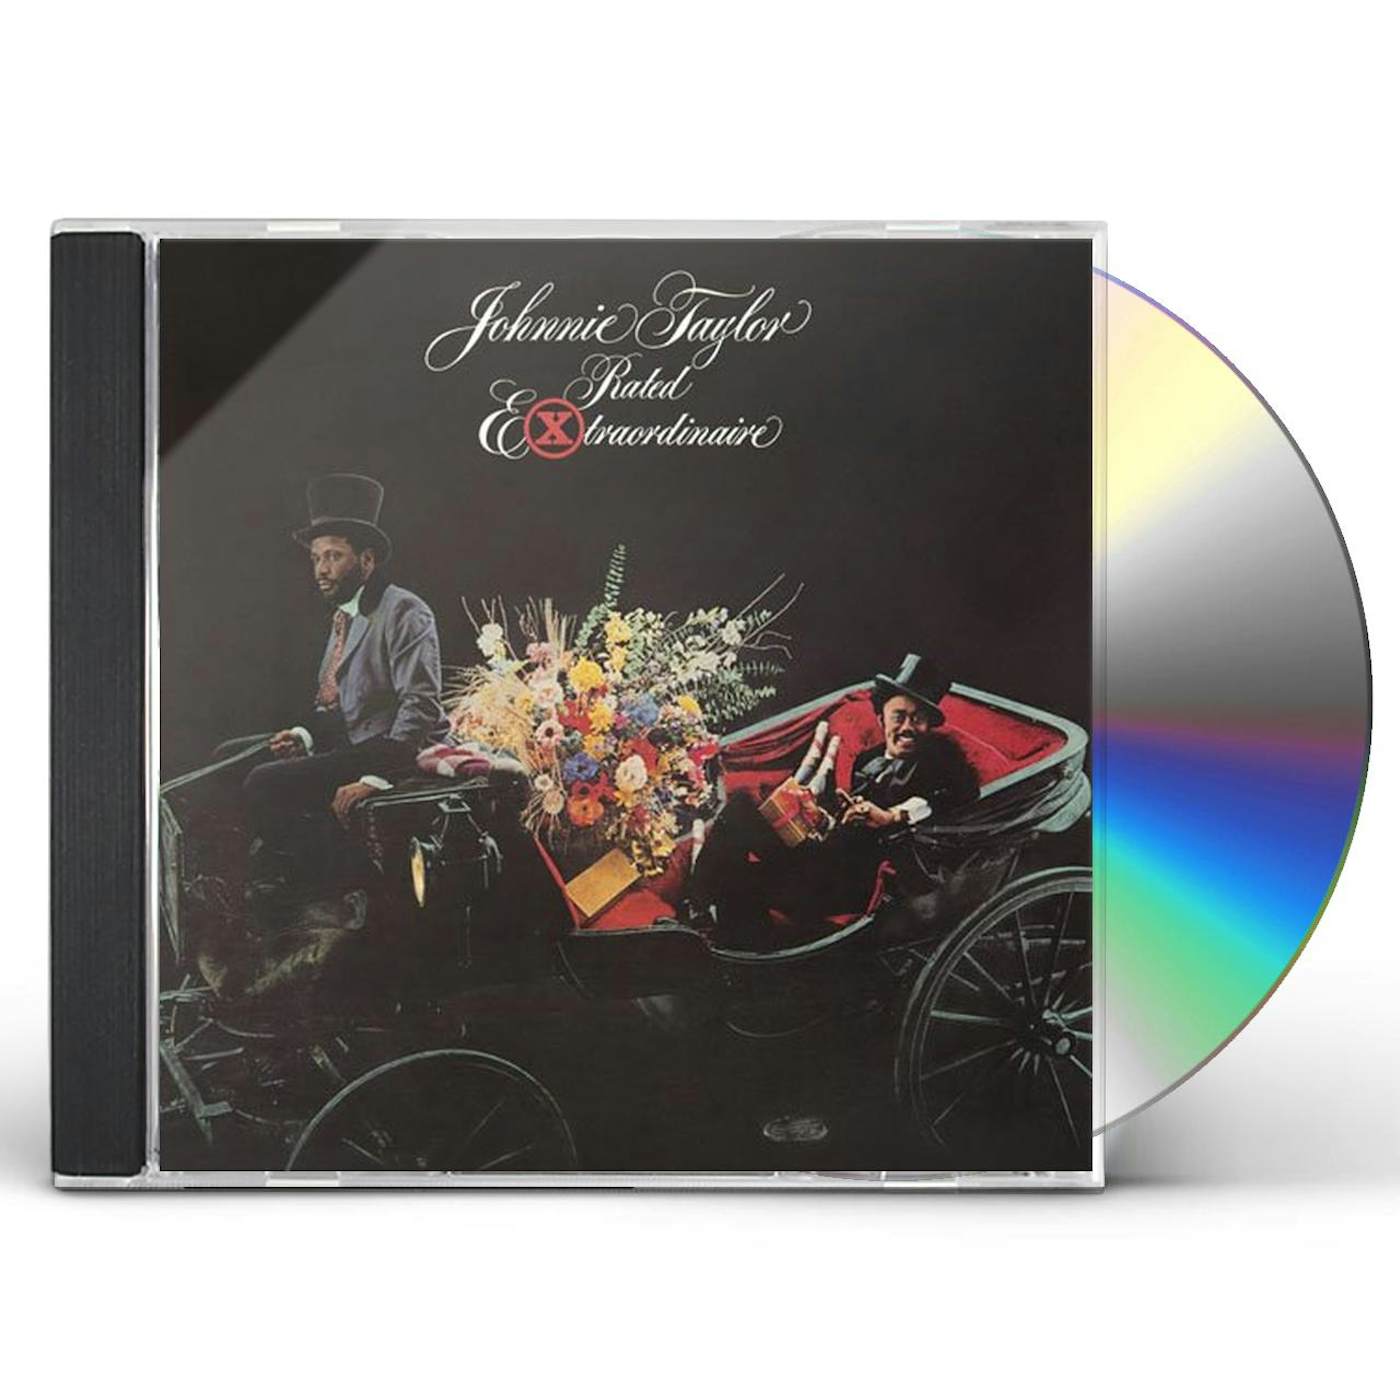 Johnnie Taylor RATED EXTRAORDINAIRE CD